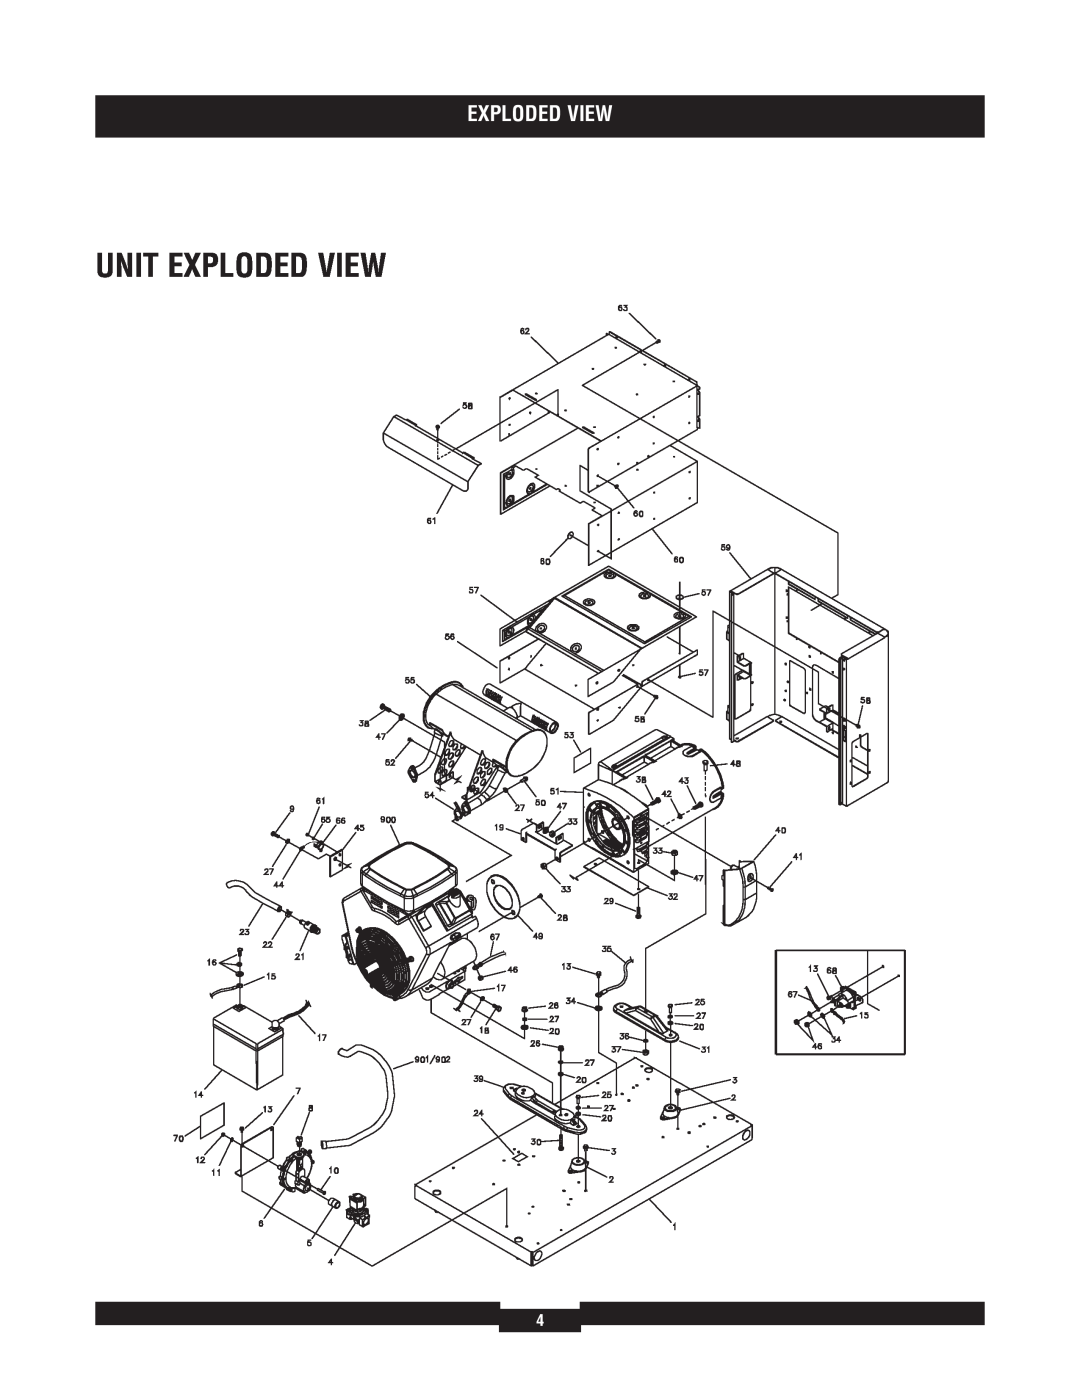 Briggs & Stratton 040229-1 manual Unit Exploded View 